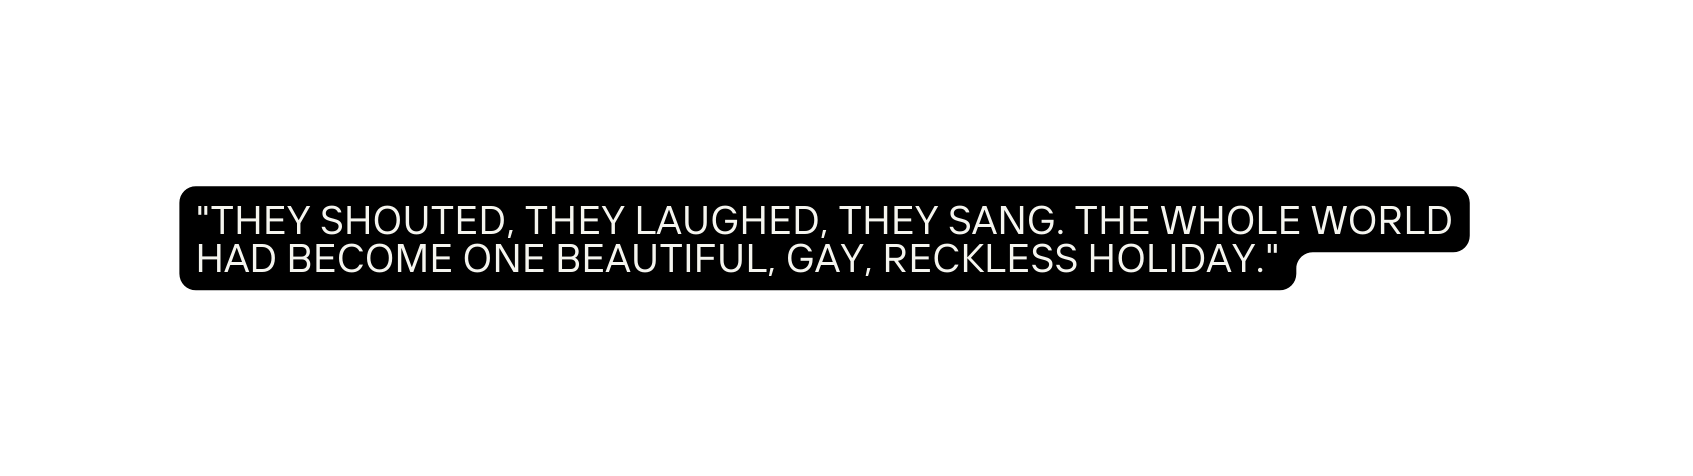 They shouted they laughed they sang The whole world had become one beautiful gay reckless holiday